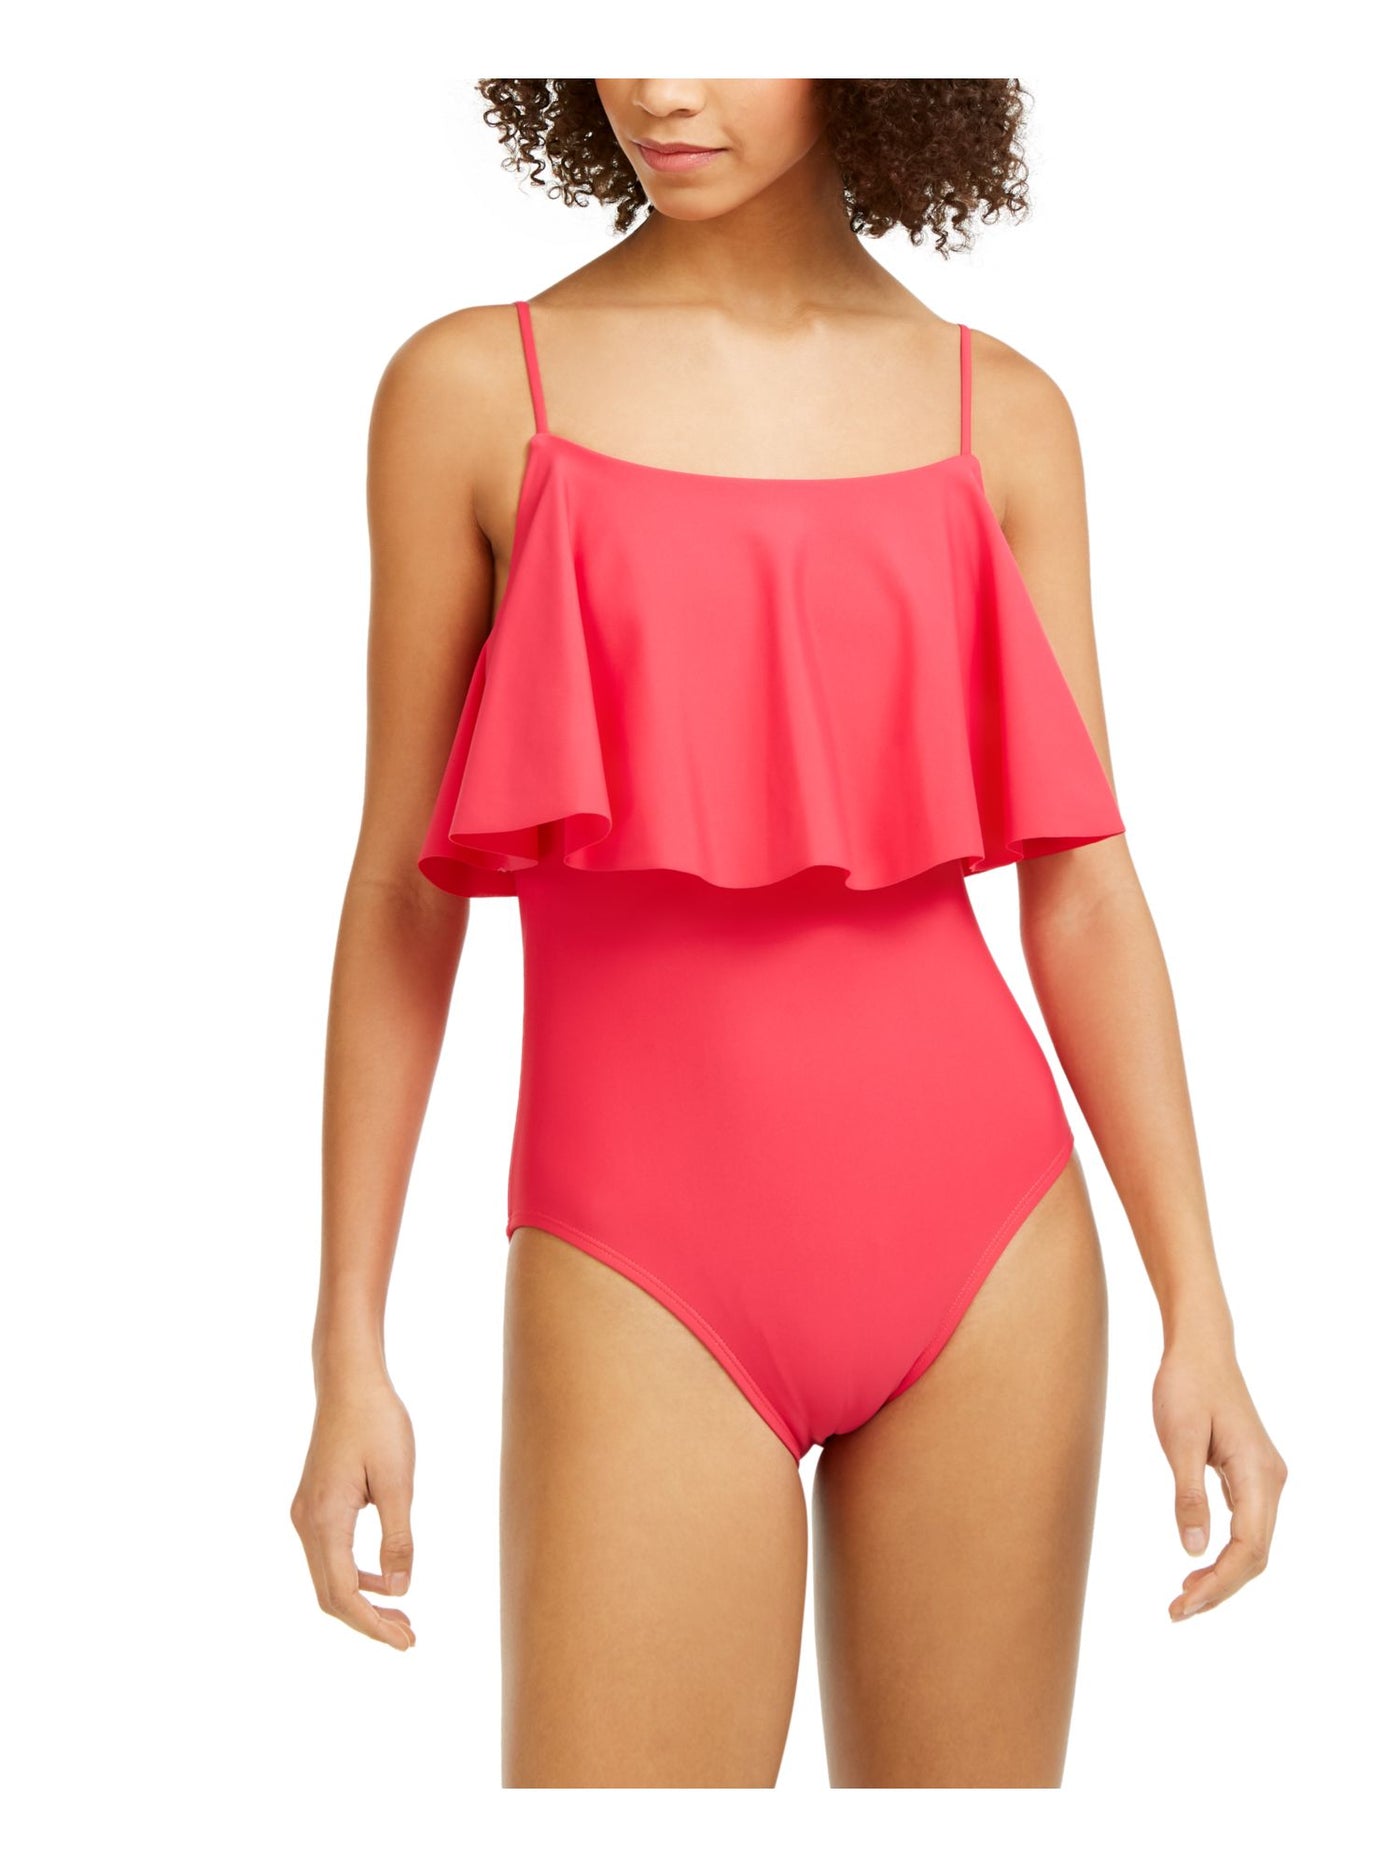 TOMMY HILFIGER Women's Pink Stretch Flutter Removable Cups Moderate Coverage Adjustable One Piece Swimsuit 10